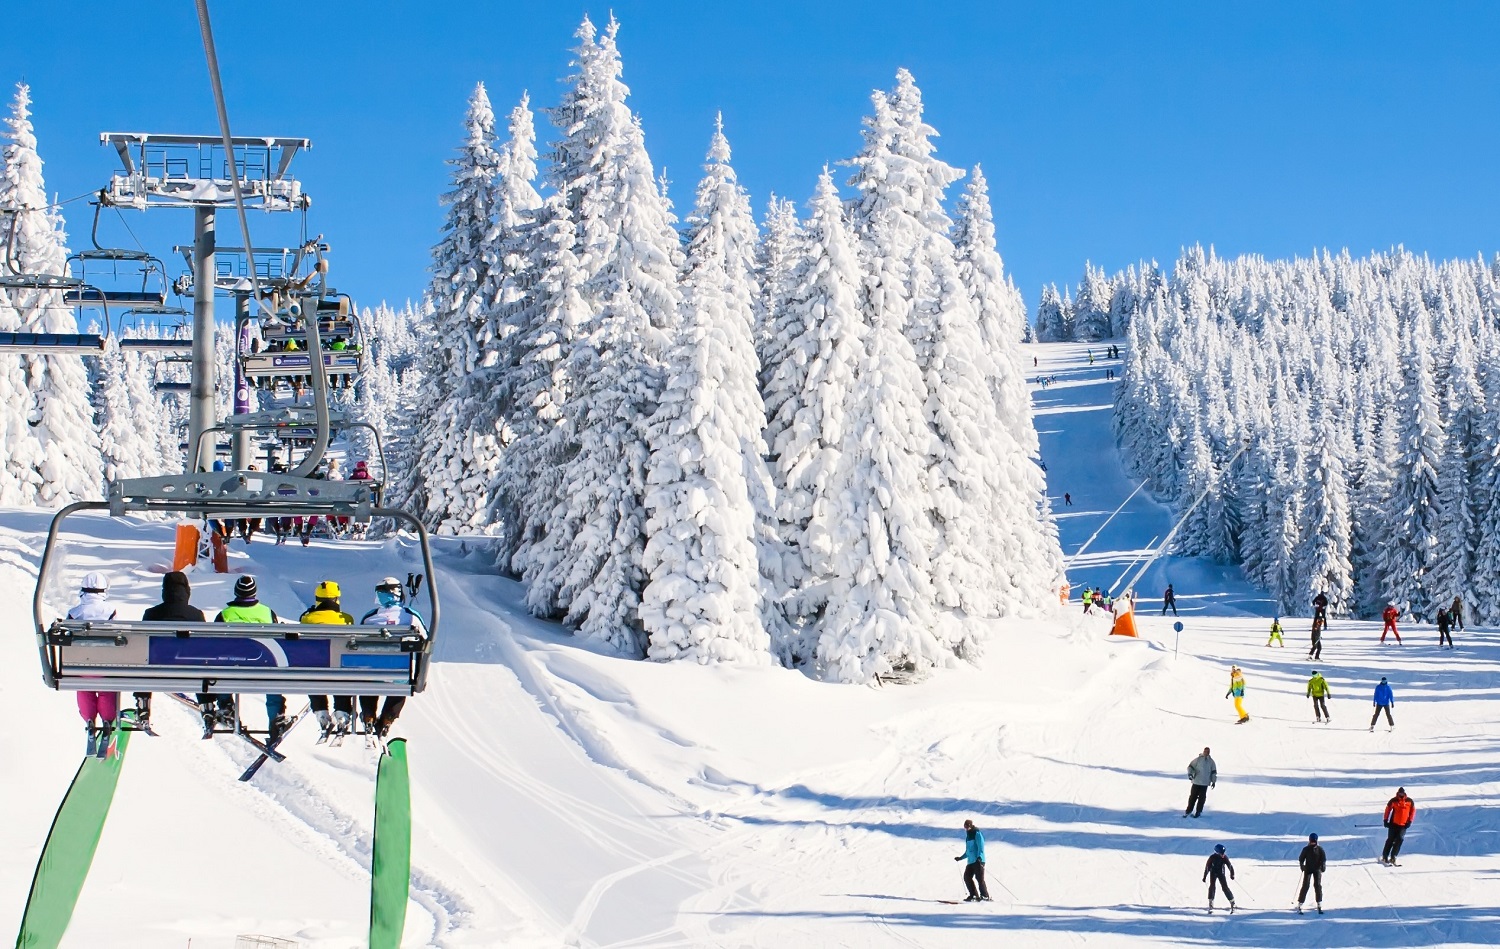 Early Warning and Public Address Systems for Ski Resorts